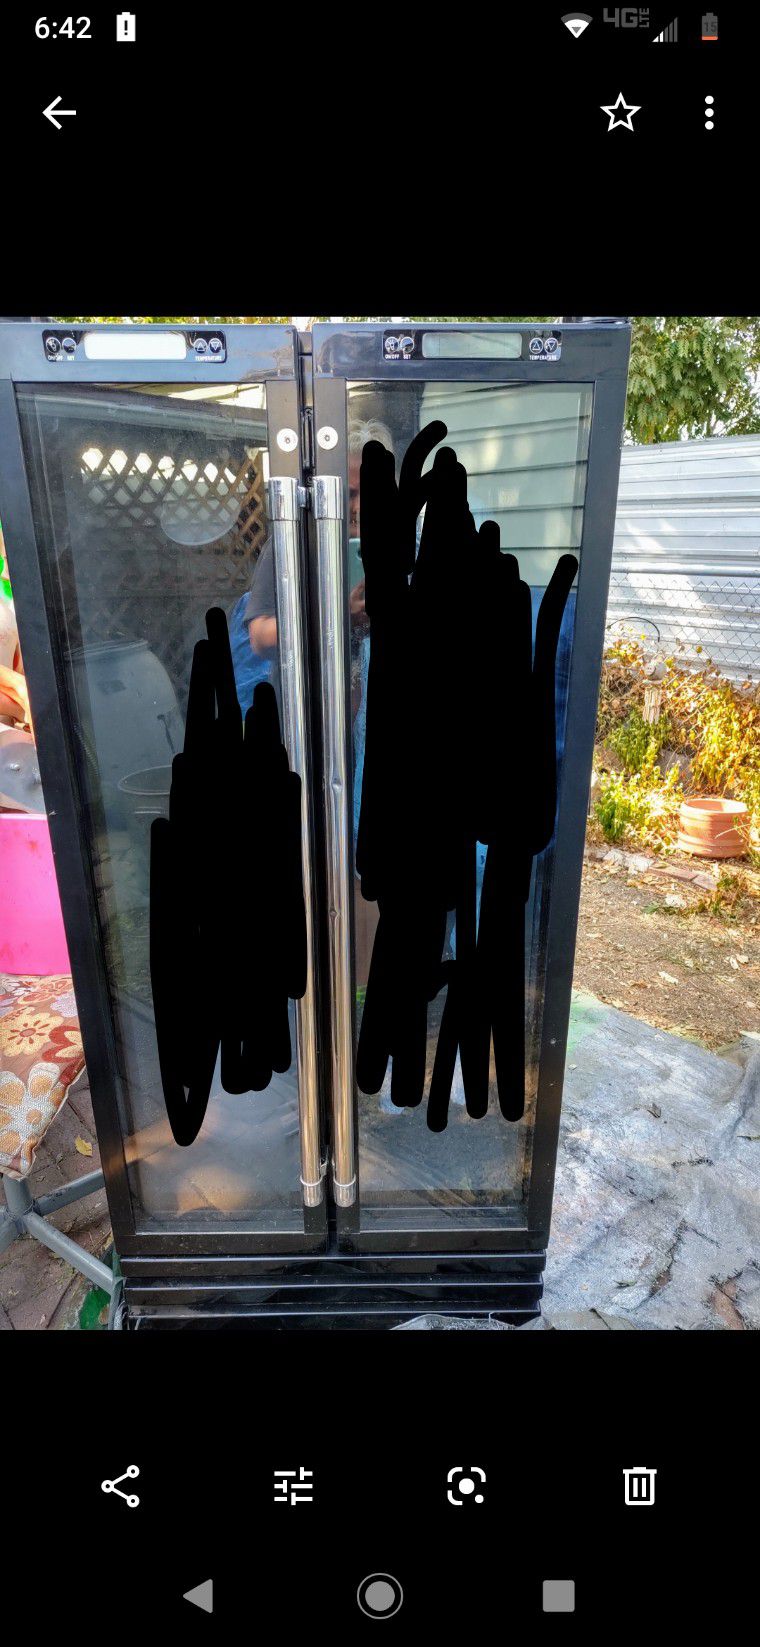 Free large non working wine fridge and water heater